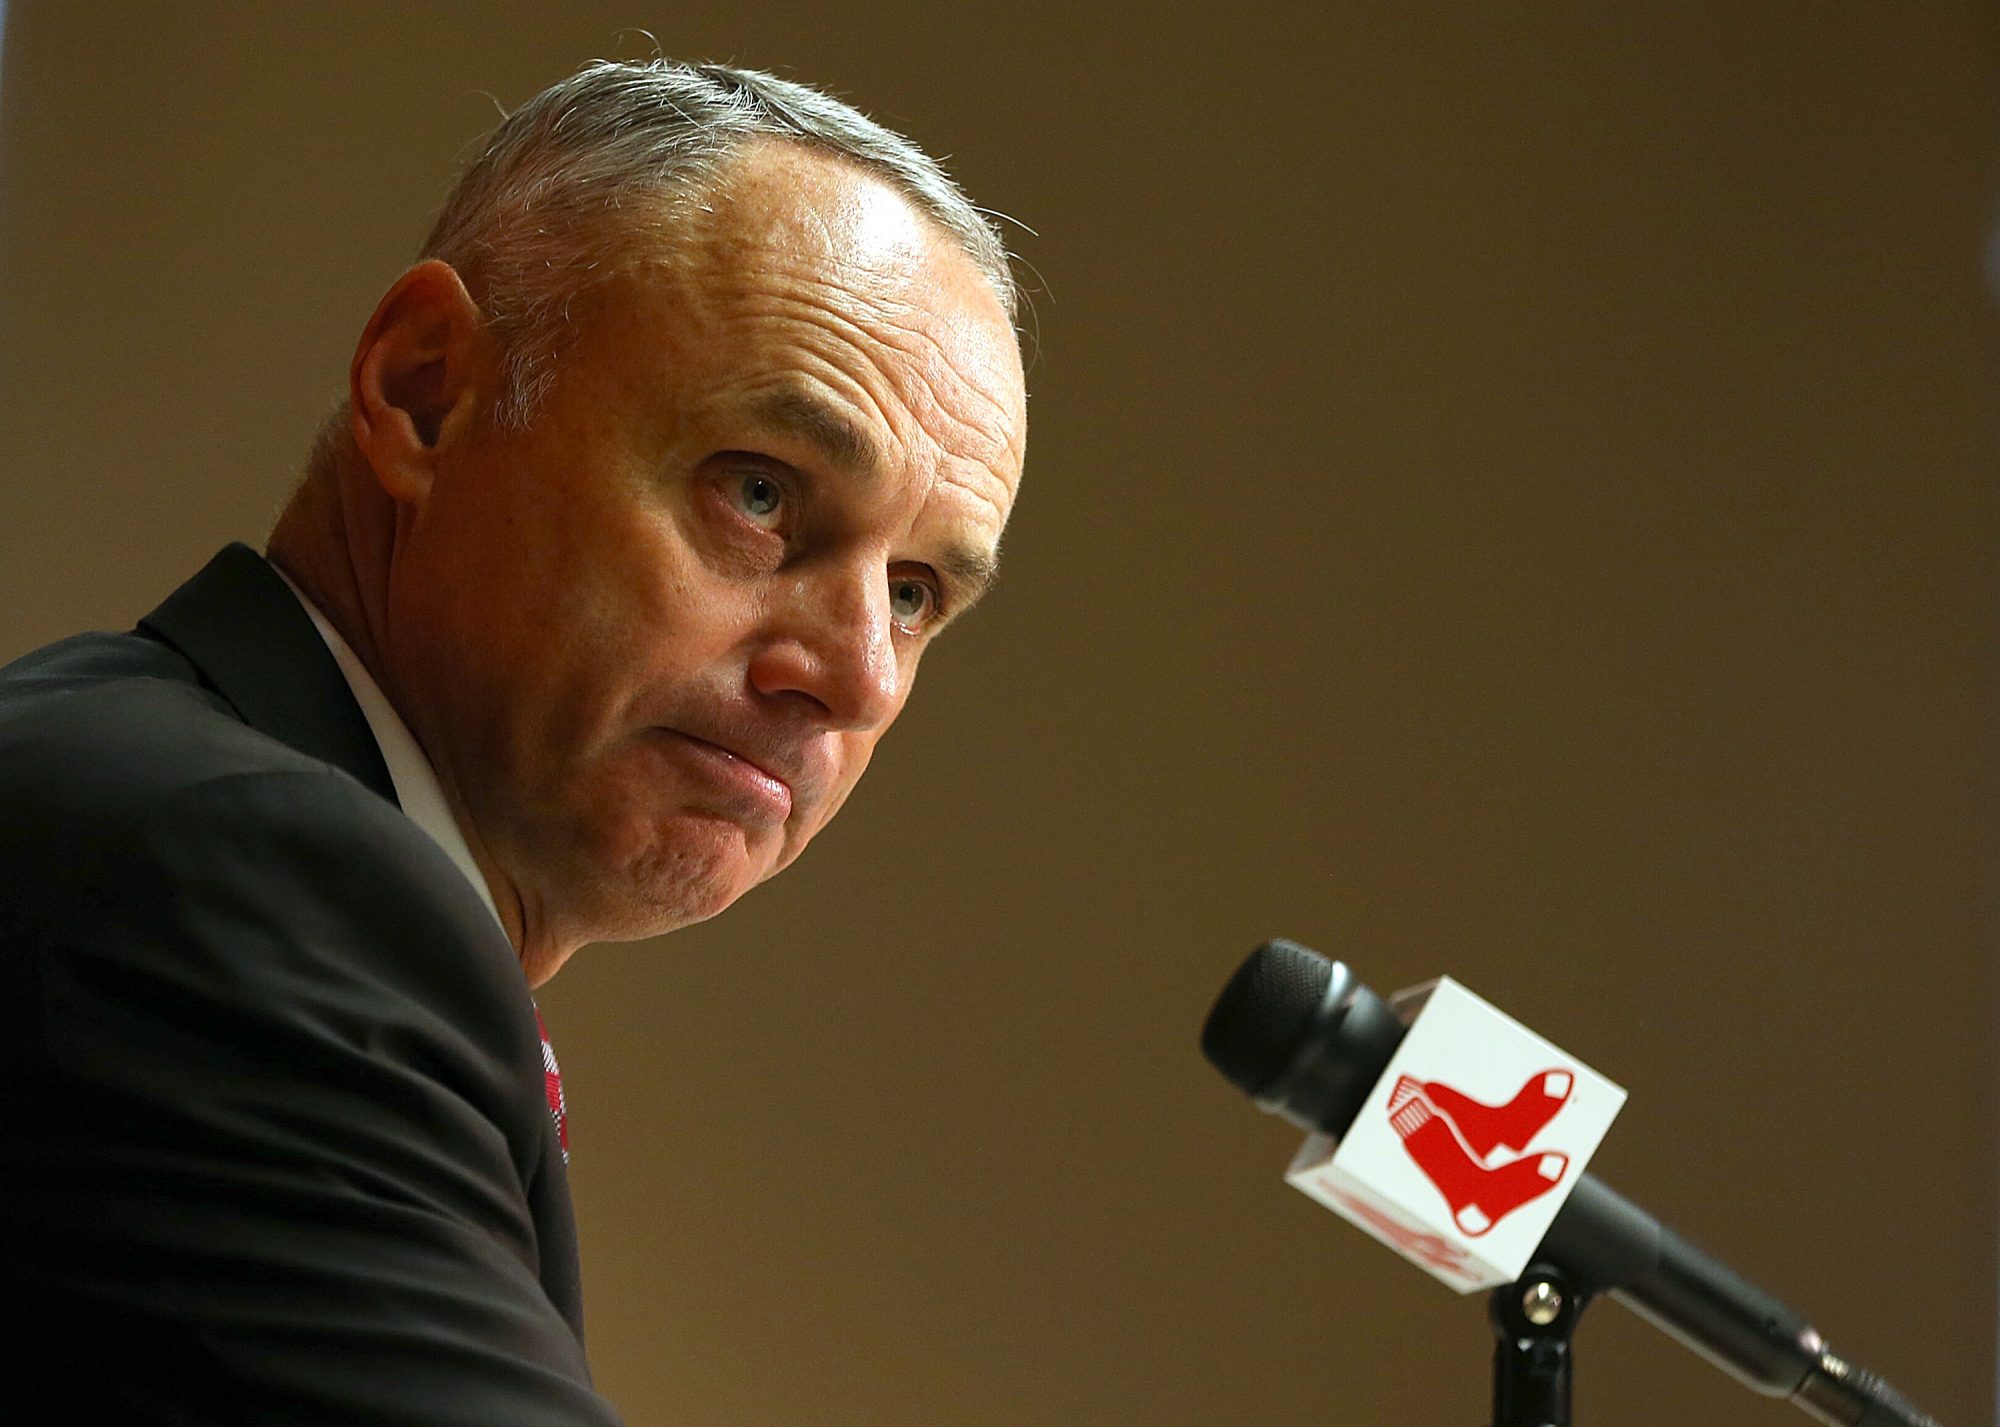 MLB missing the revenue sharing mark hurting fans and players